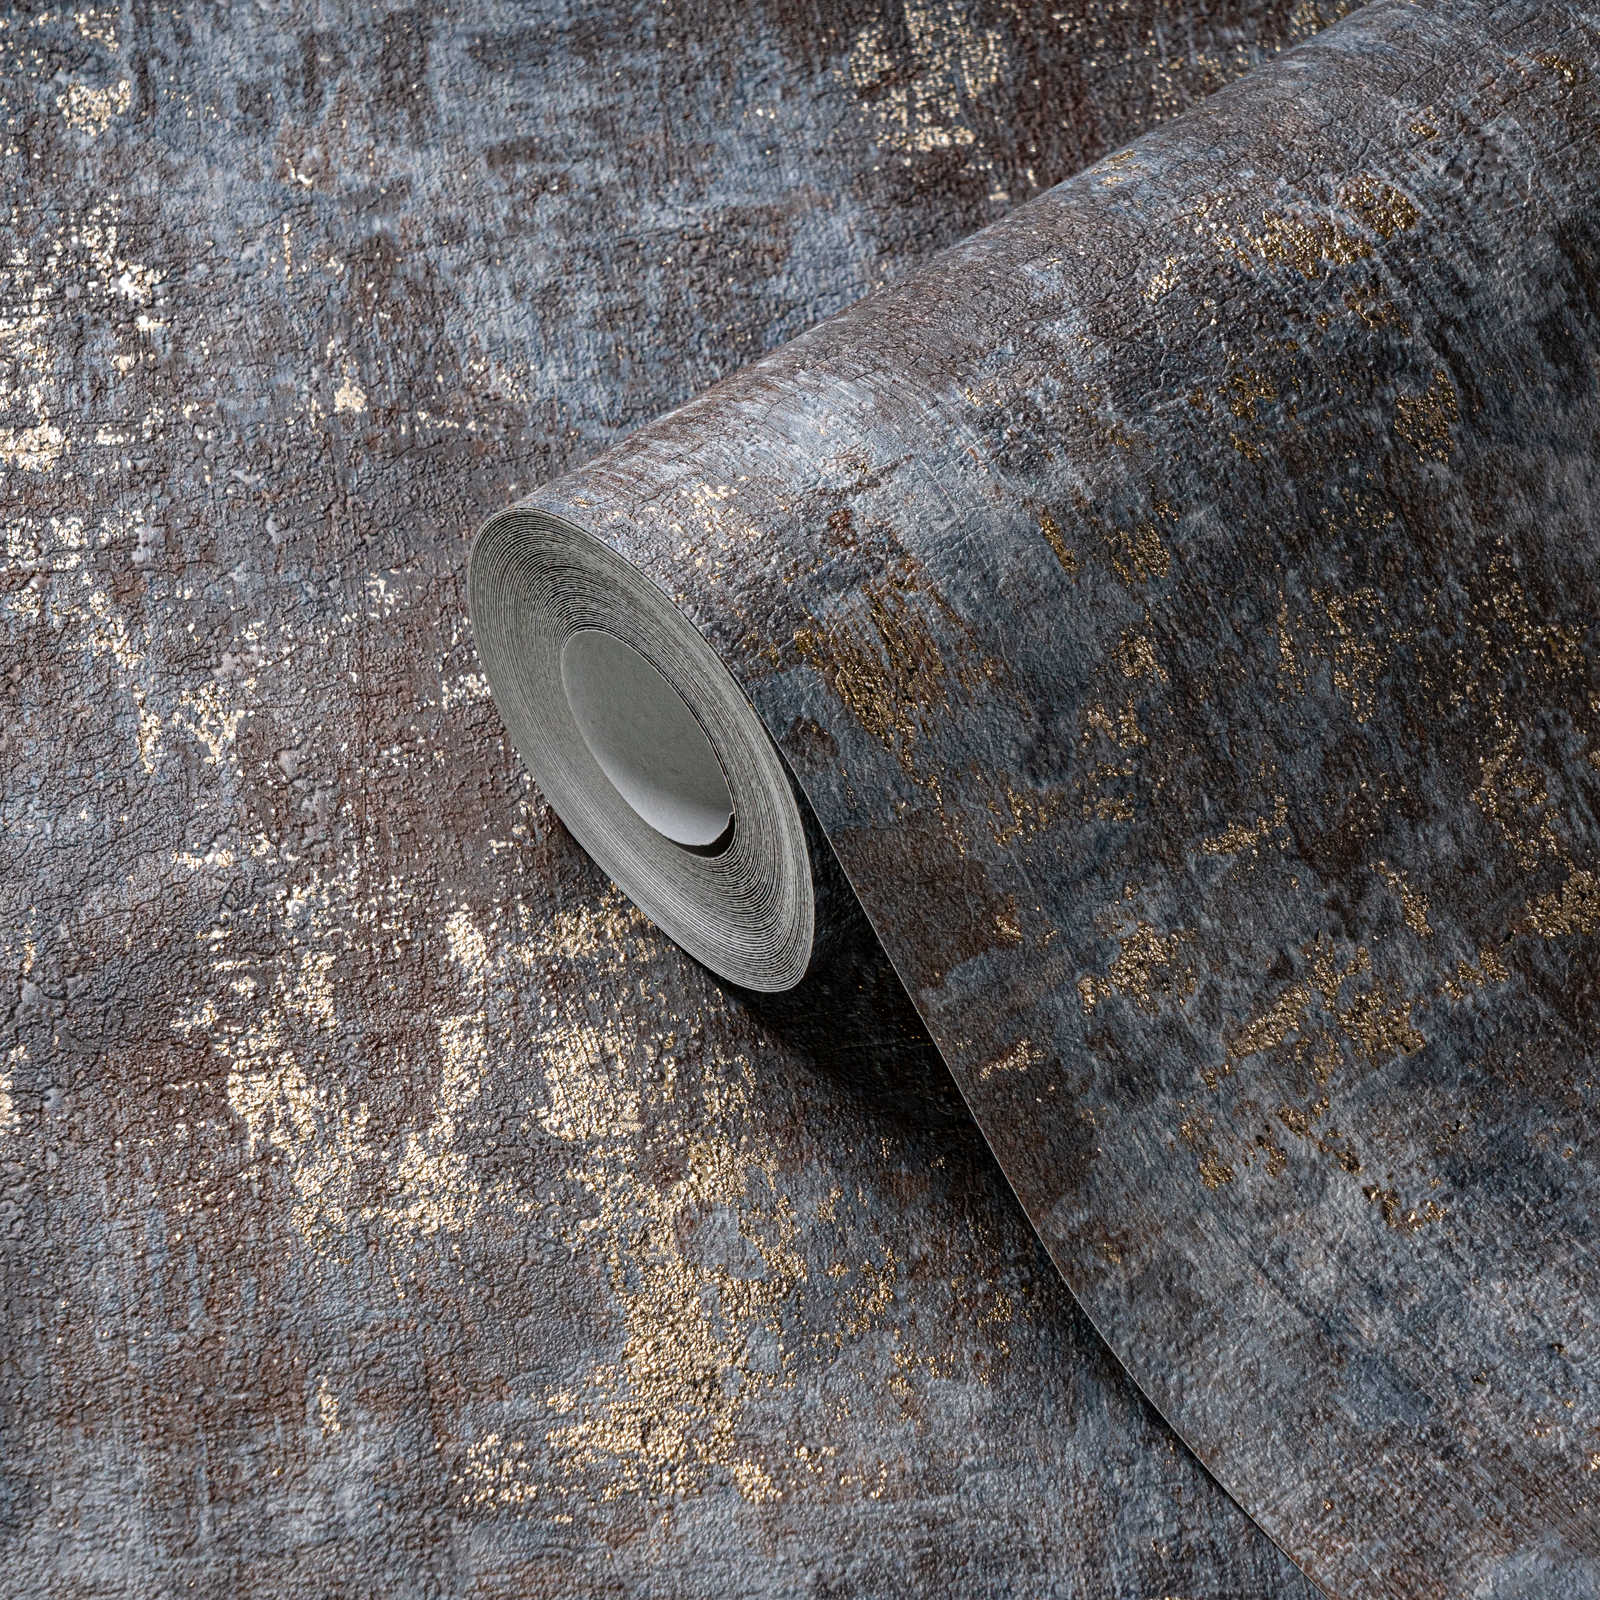             Rust-look wallpaper with metallic accents - brown, blue, gold
        